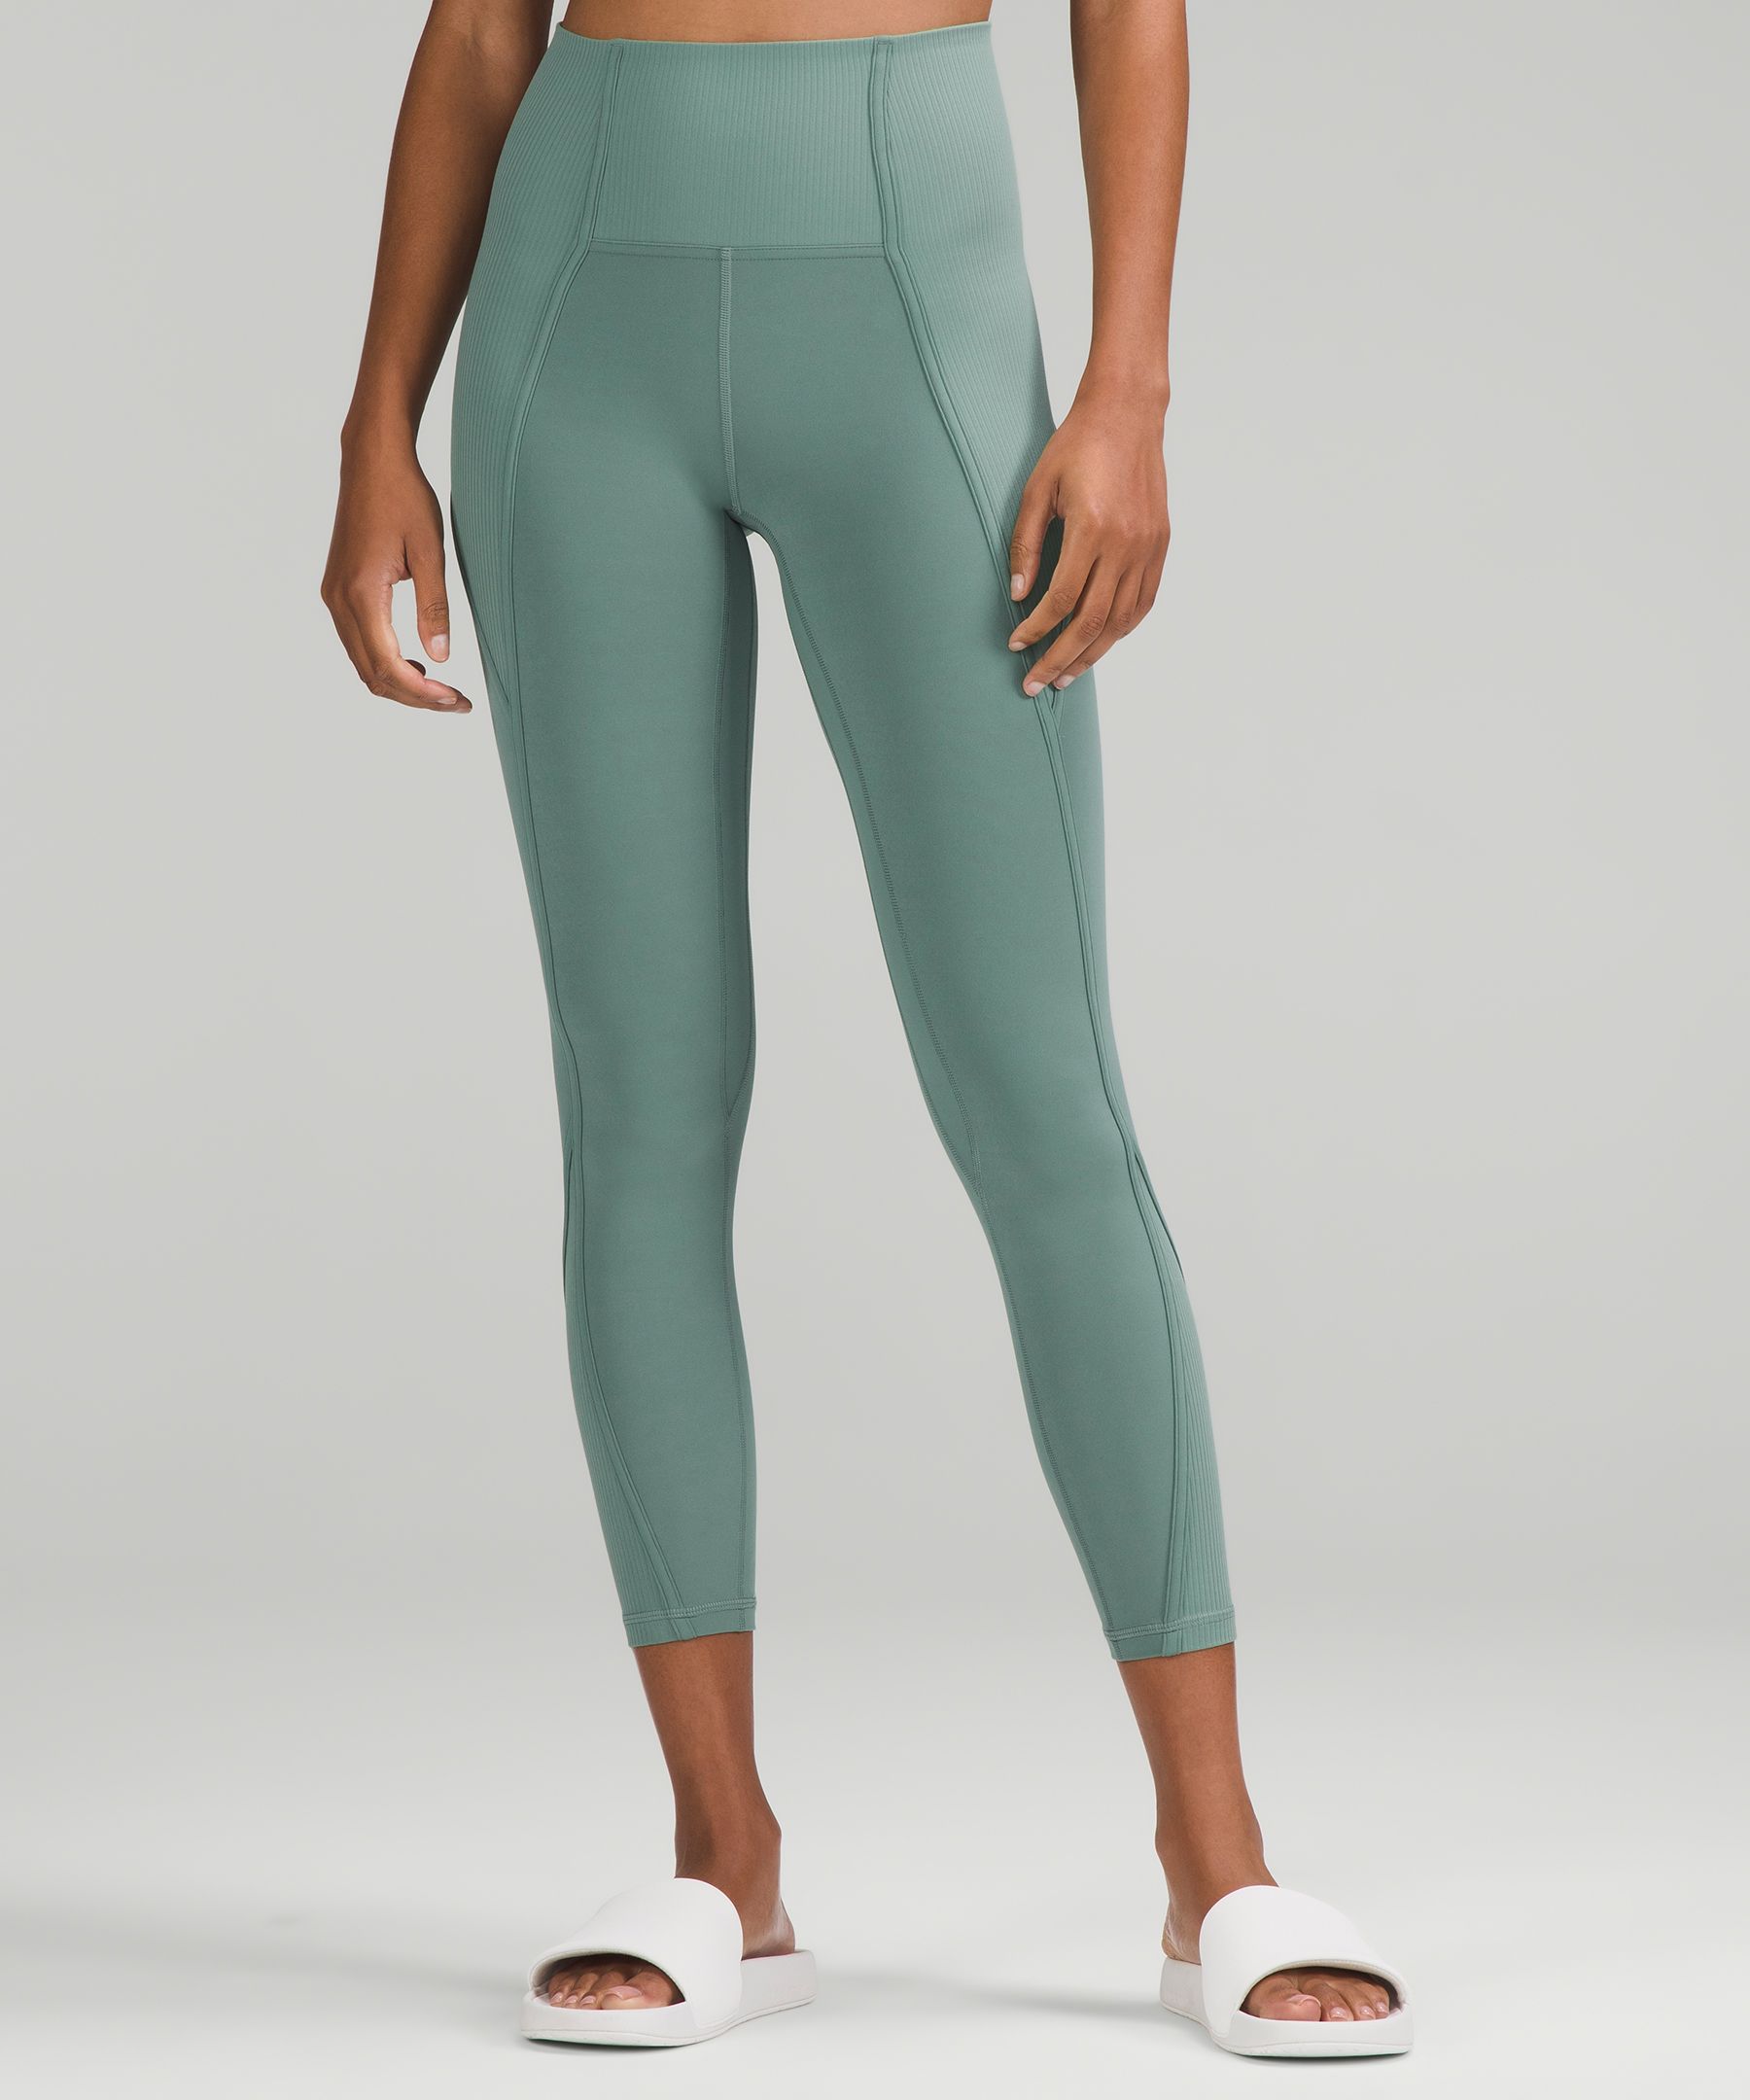 Lululemon Align™ Ribbed Panel High-rise Tights 25" In Tidewater Teal